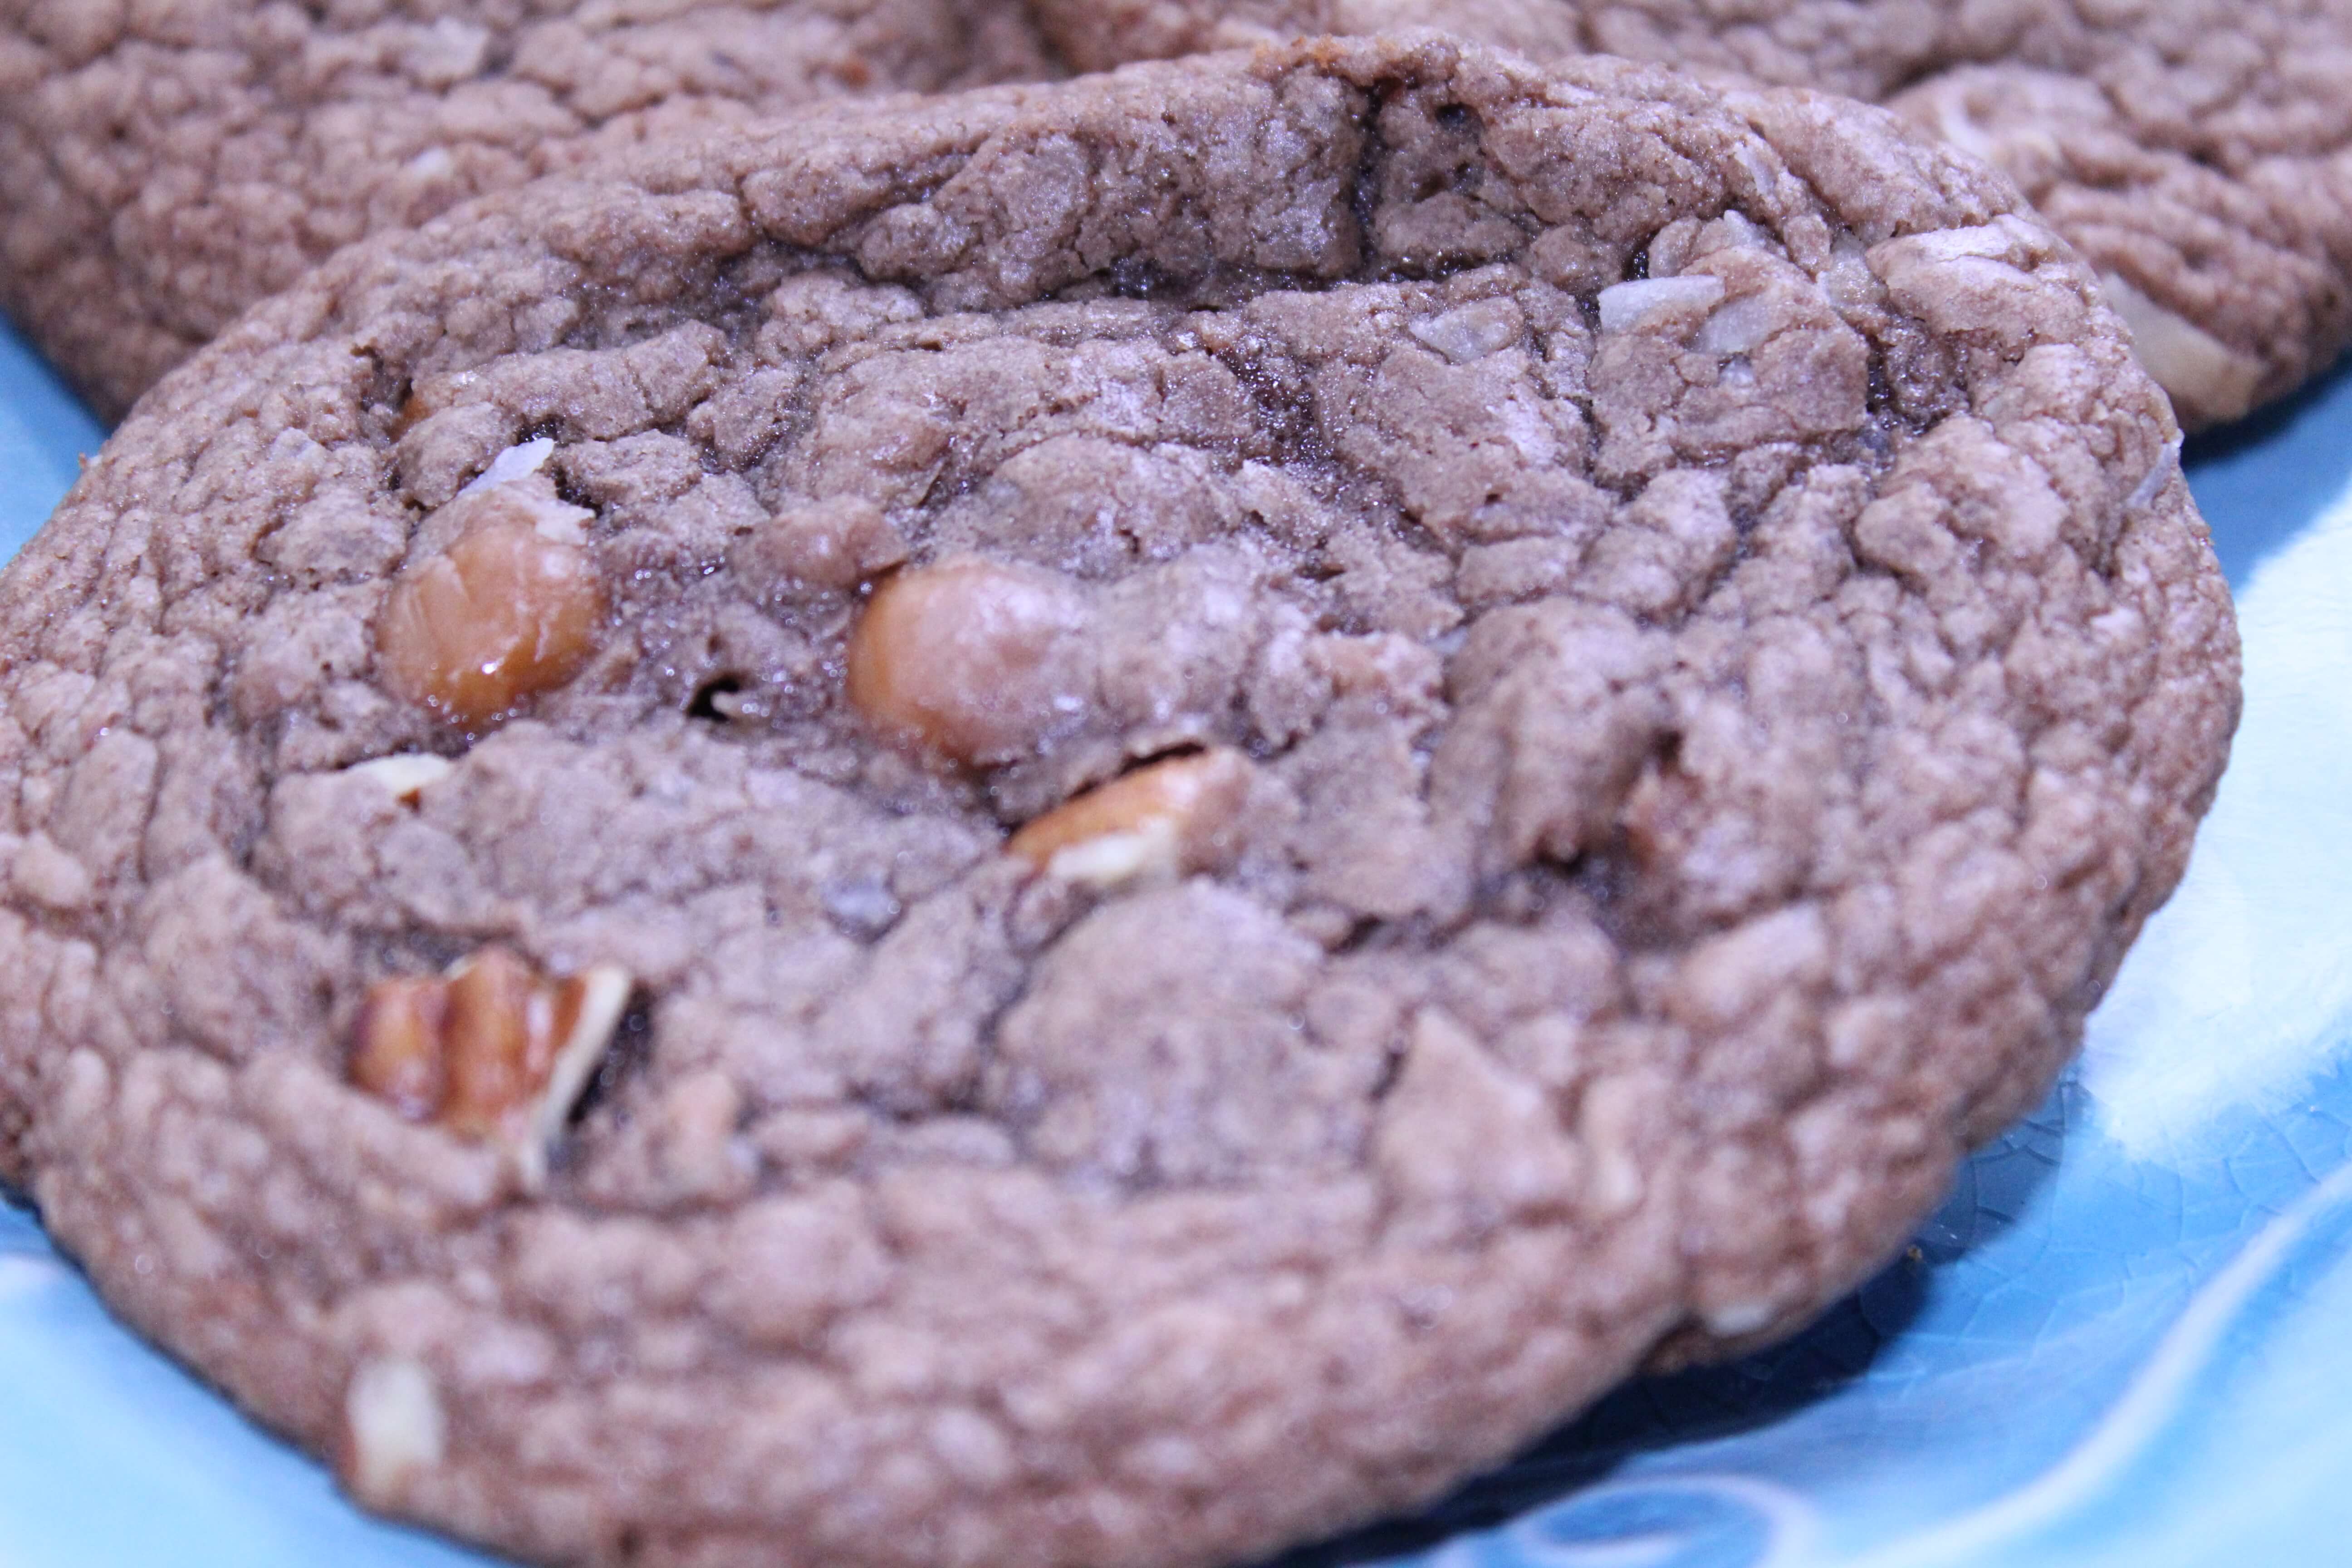 These German Chocolate Cookies have all the great flavors of a German chocolate cake...but in cookie form. Yum!